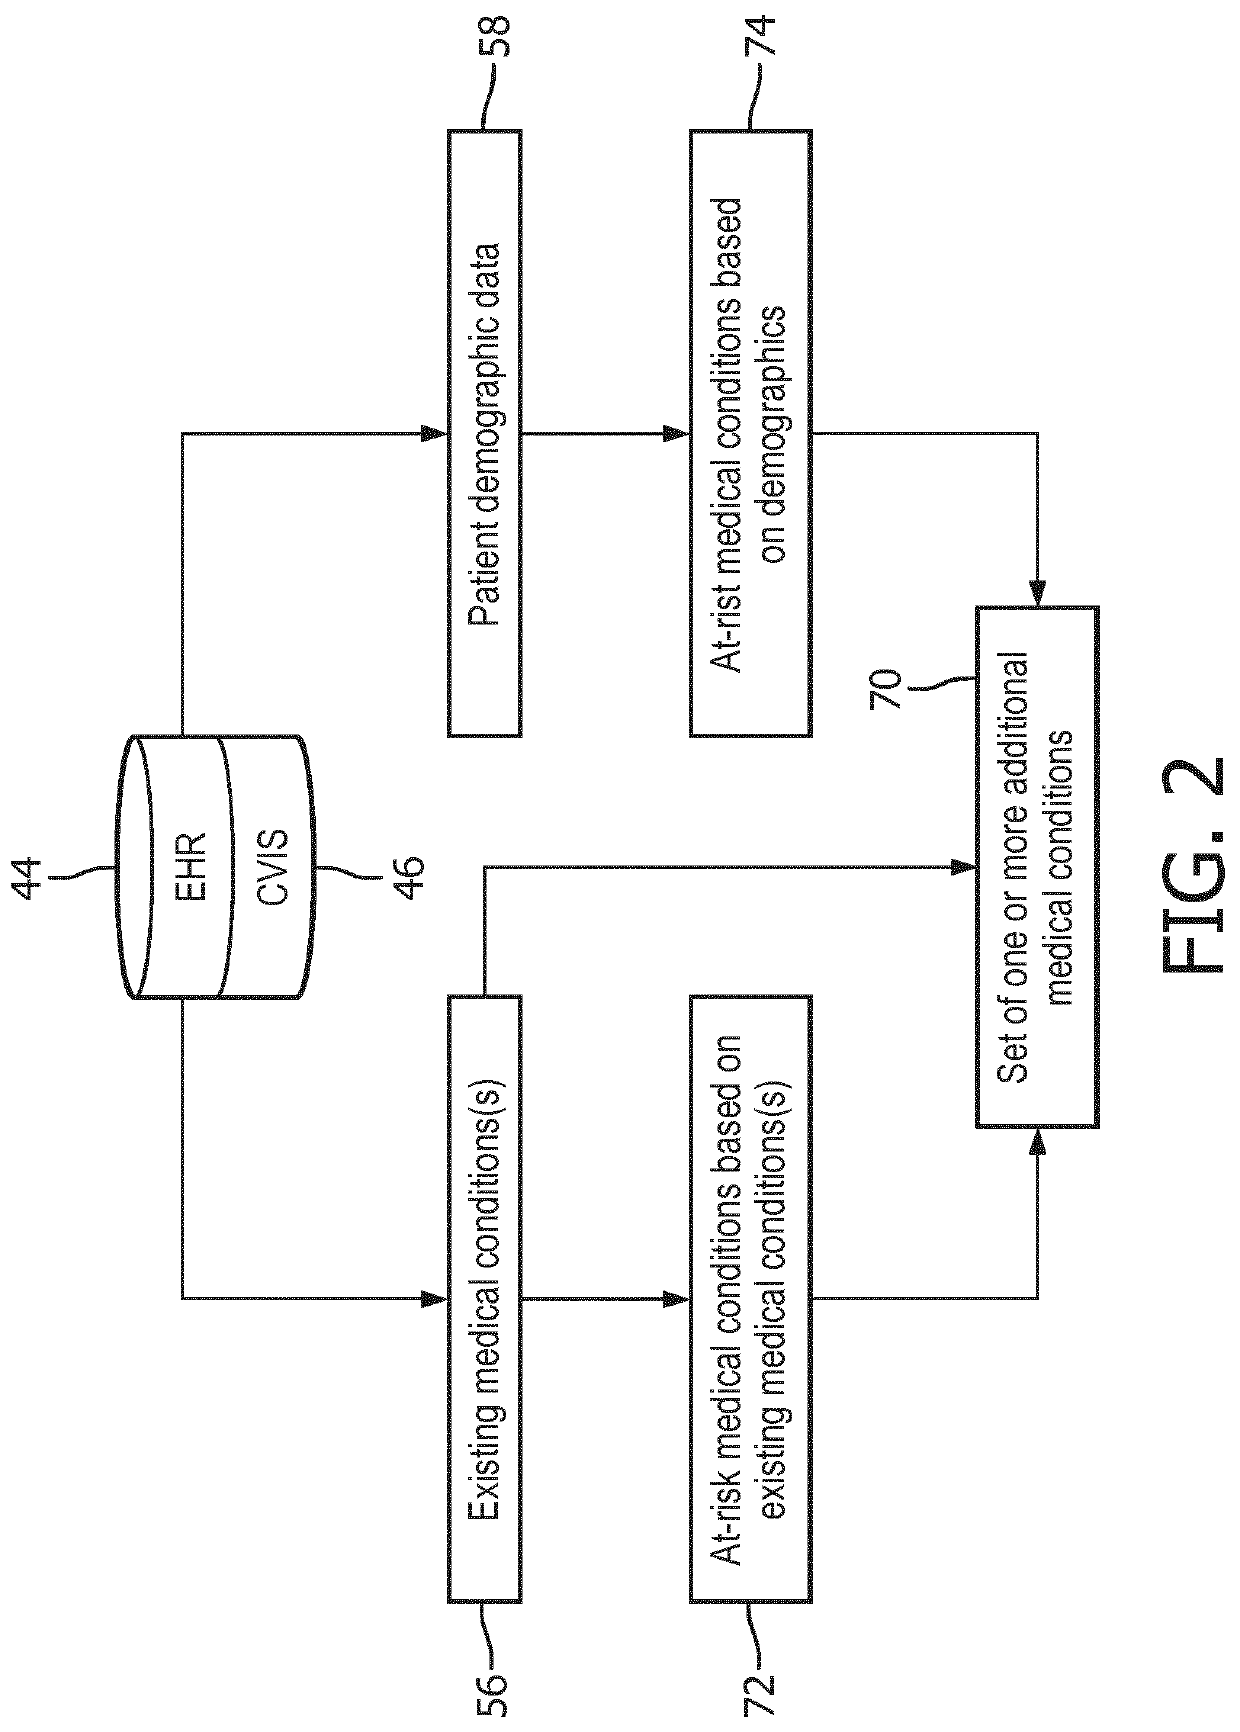 System and method to automatically prepare an attention list for improving radiology workflow